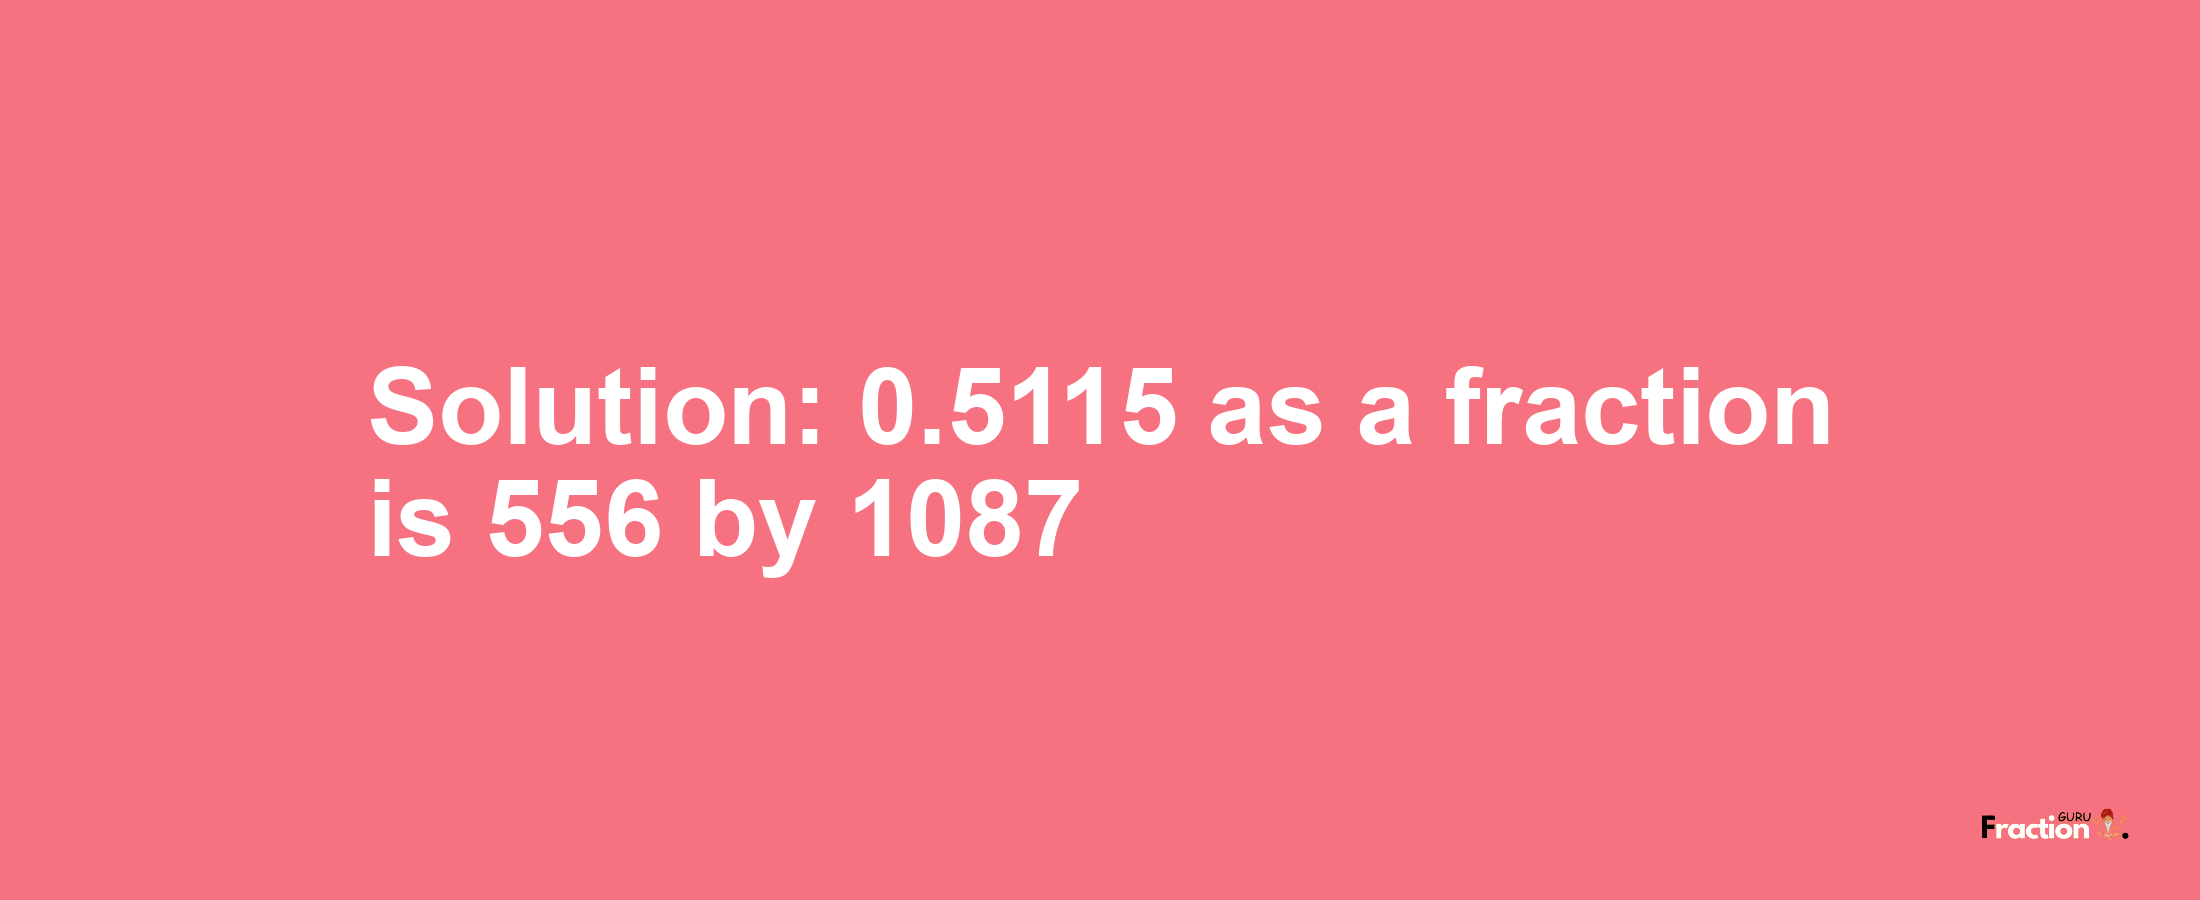 Solution:0.5115 as a fraction is 556/1087